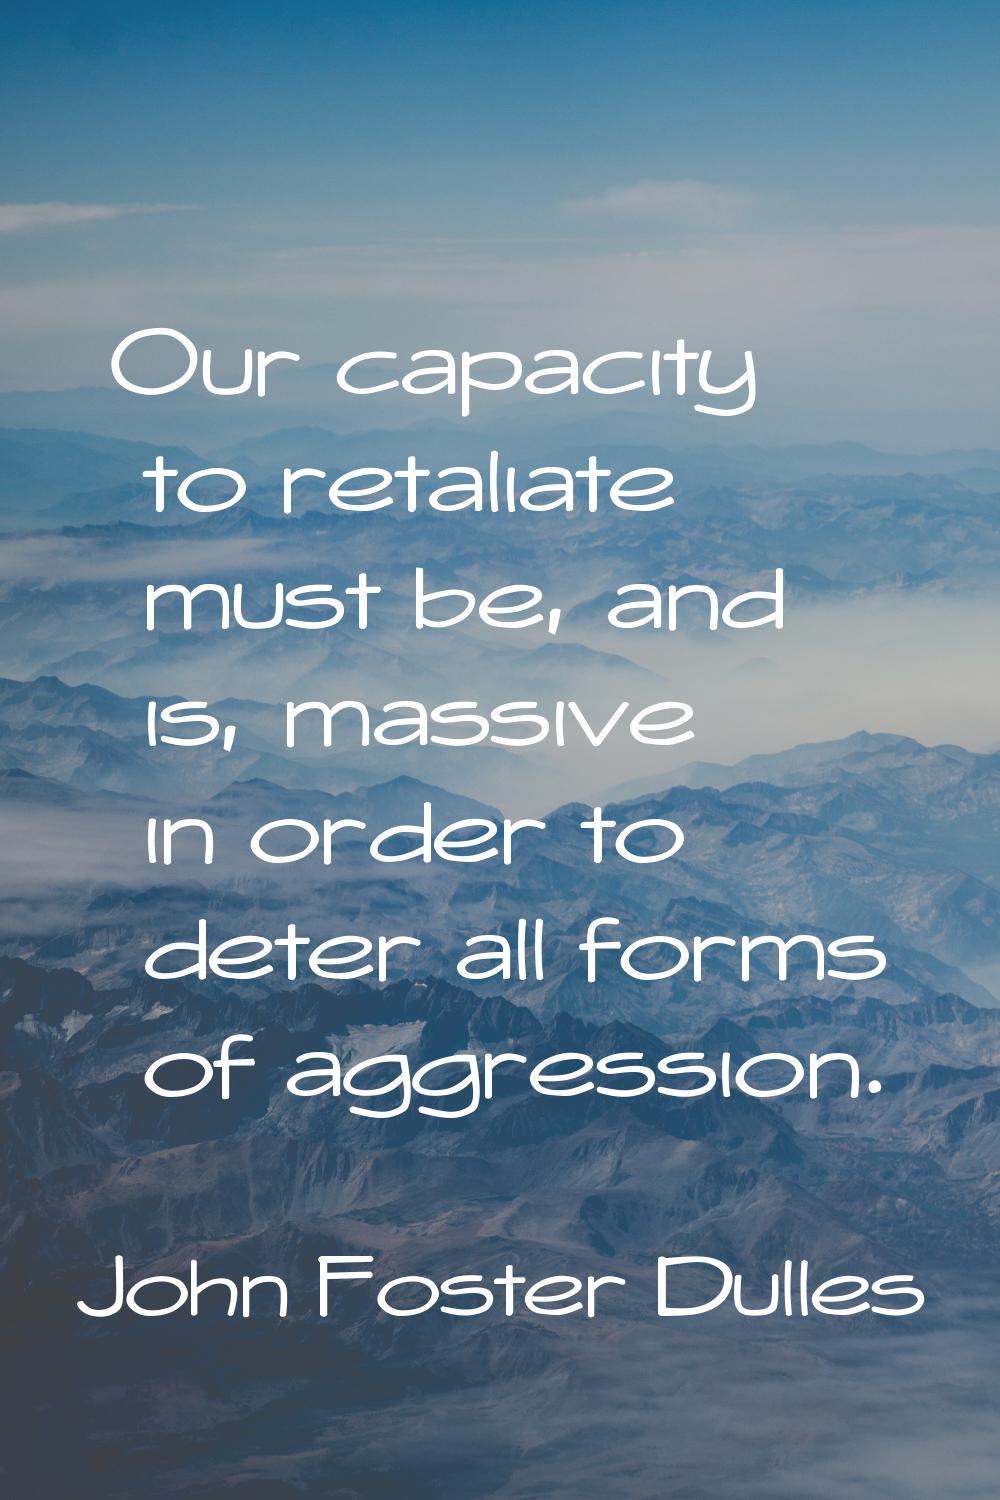 Our capacity to retaliate must be, and is, massive in order to deter all forms of aggression.